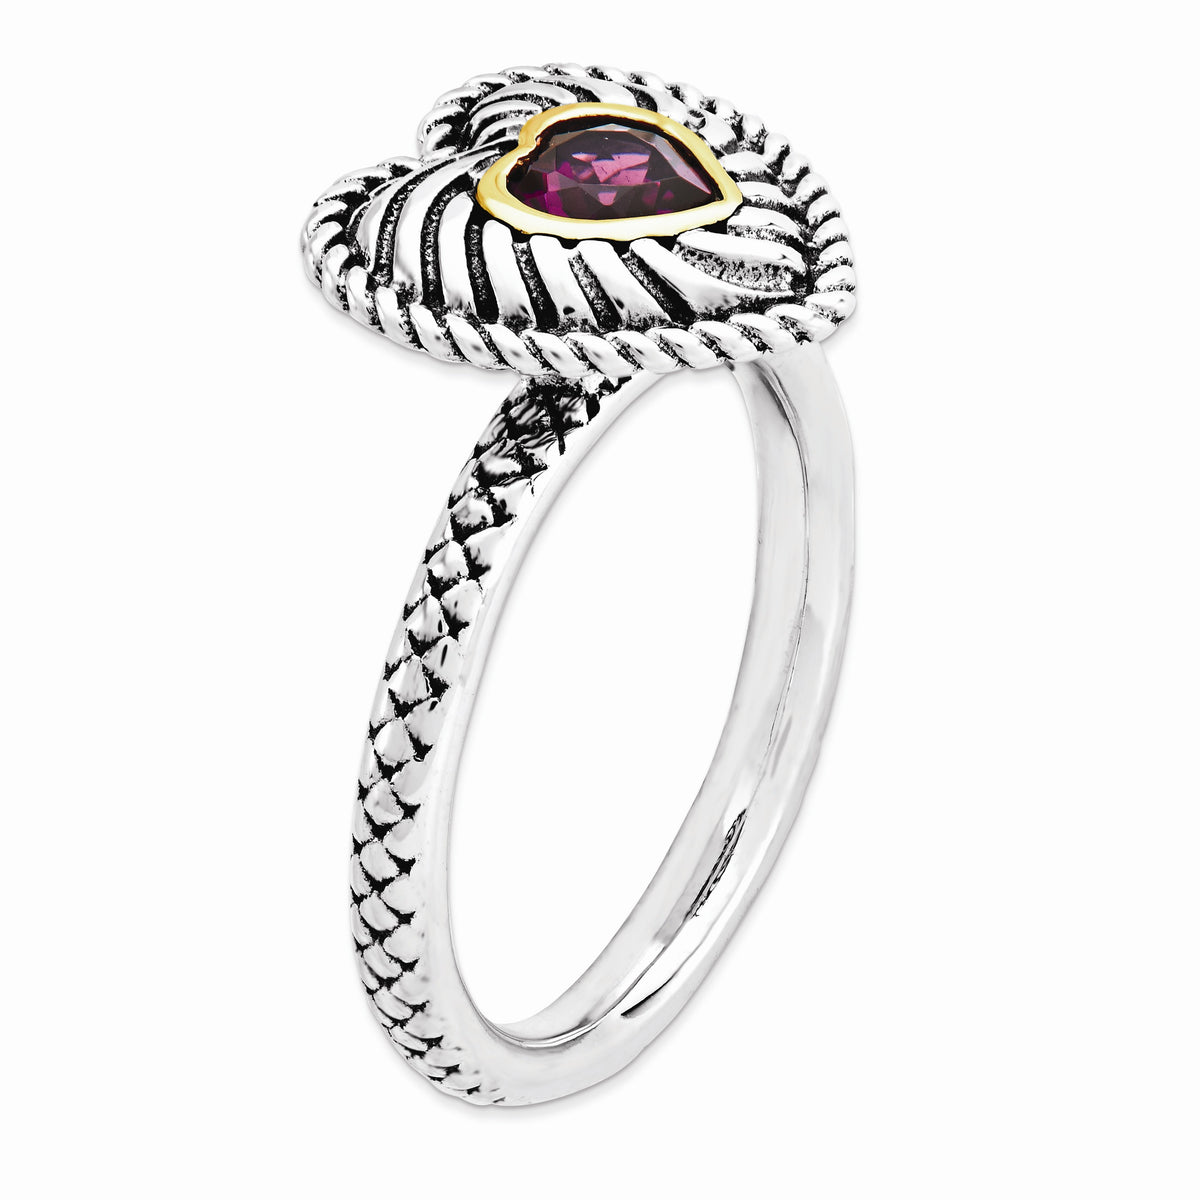 Alternate view of the Antiqued Sterling Silver Stackable Rhodolite Garnet Heart Ring by The Black Bow Jewelry Co.